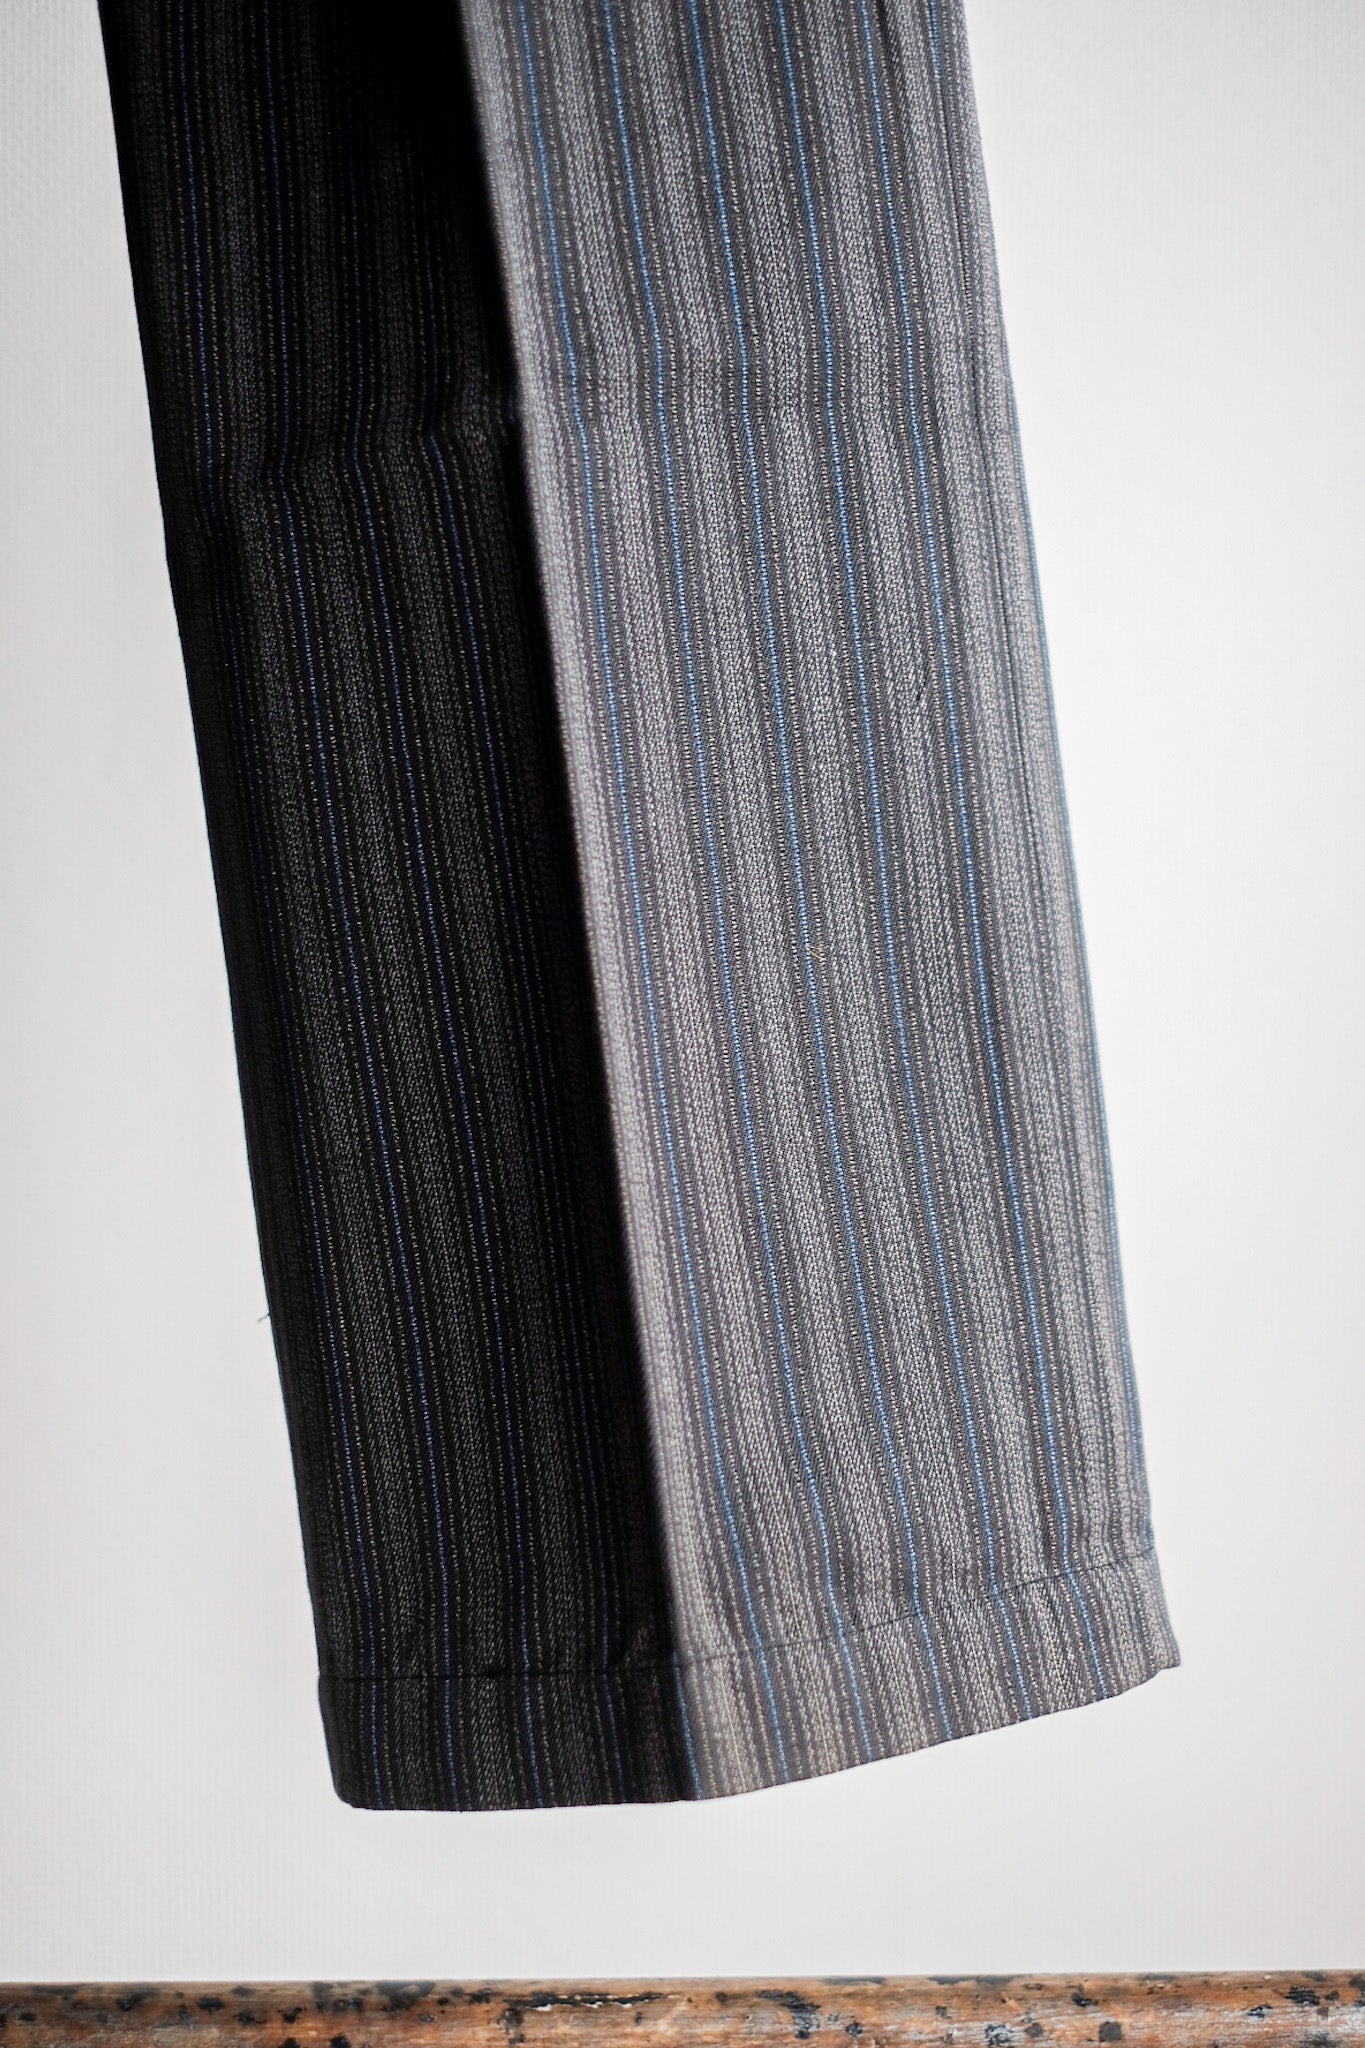 【~40's】French Vintage Cotton Striped Work Pants "Dead Stock"